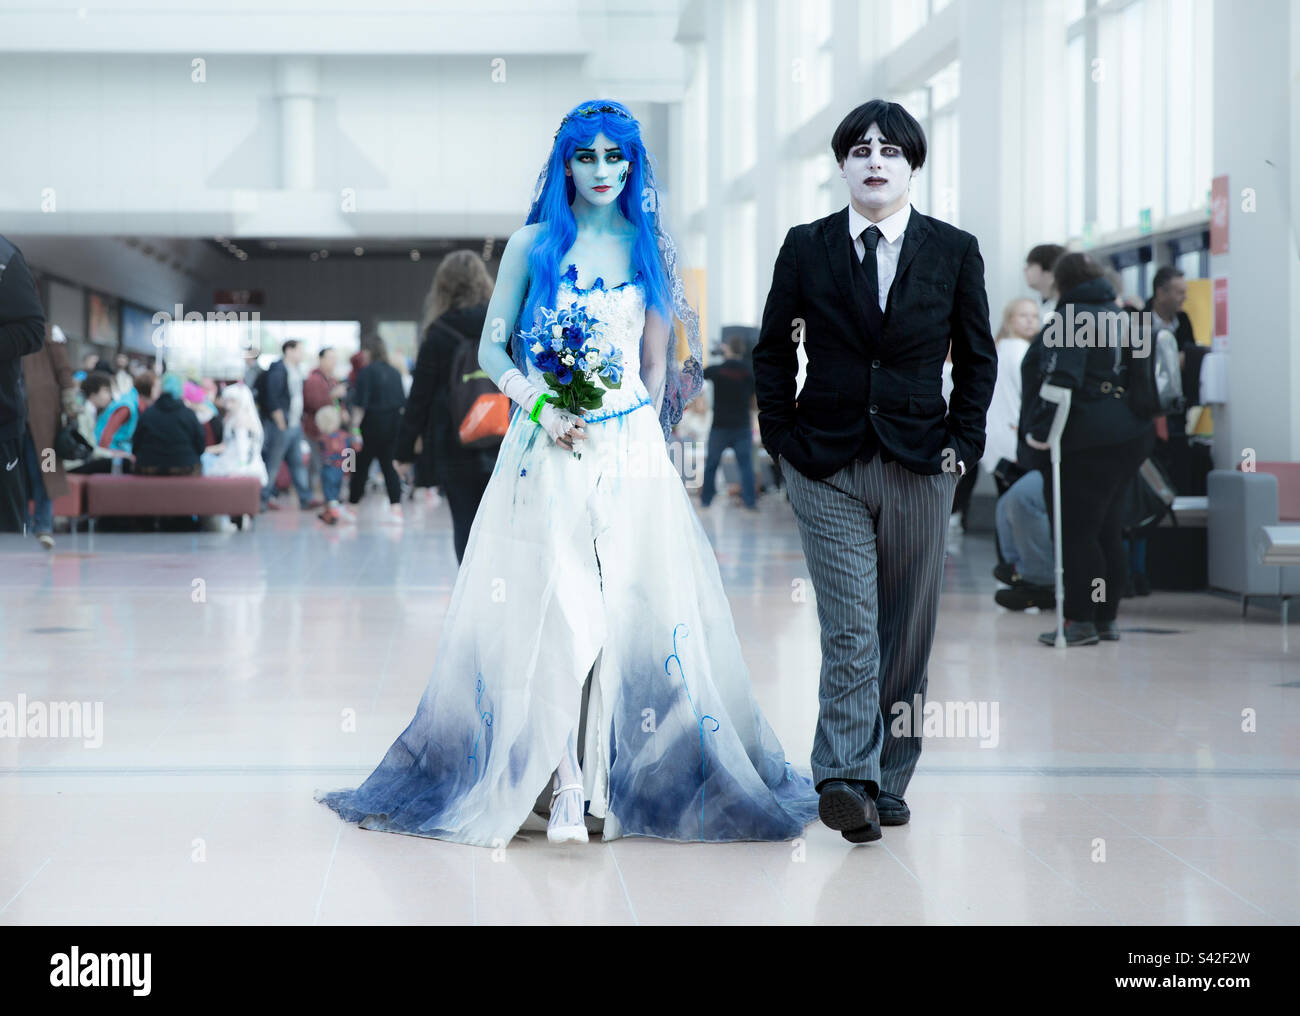 A pair of cosplayers dressed as the corpse bride and her groom at a Comic-con event Stock Photo